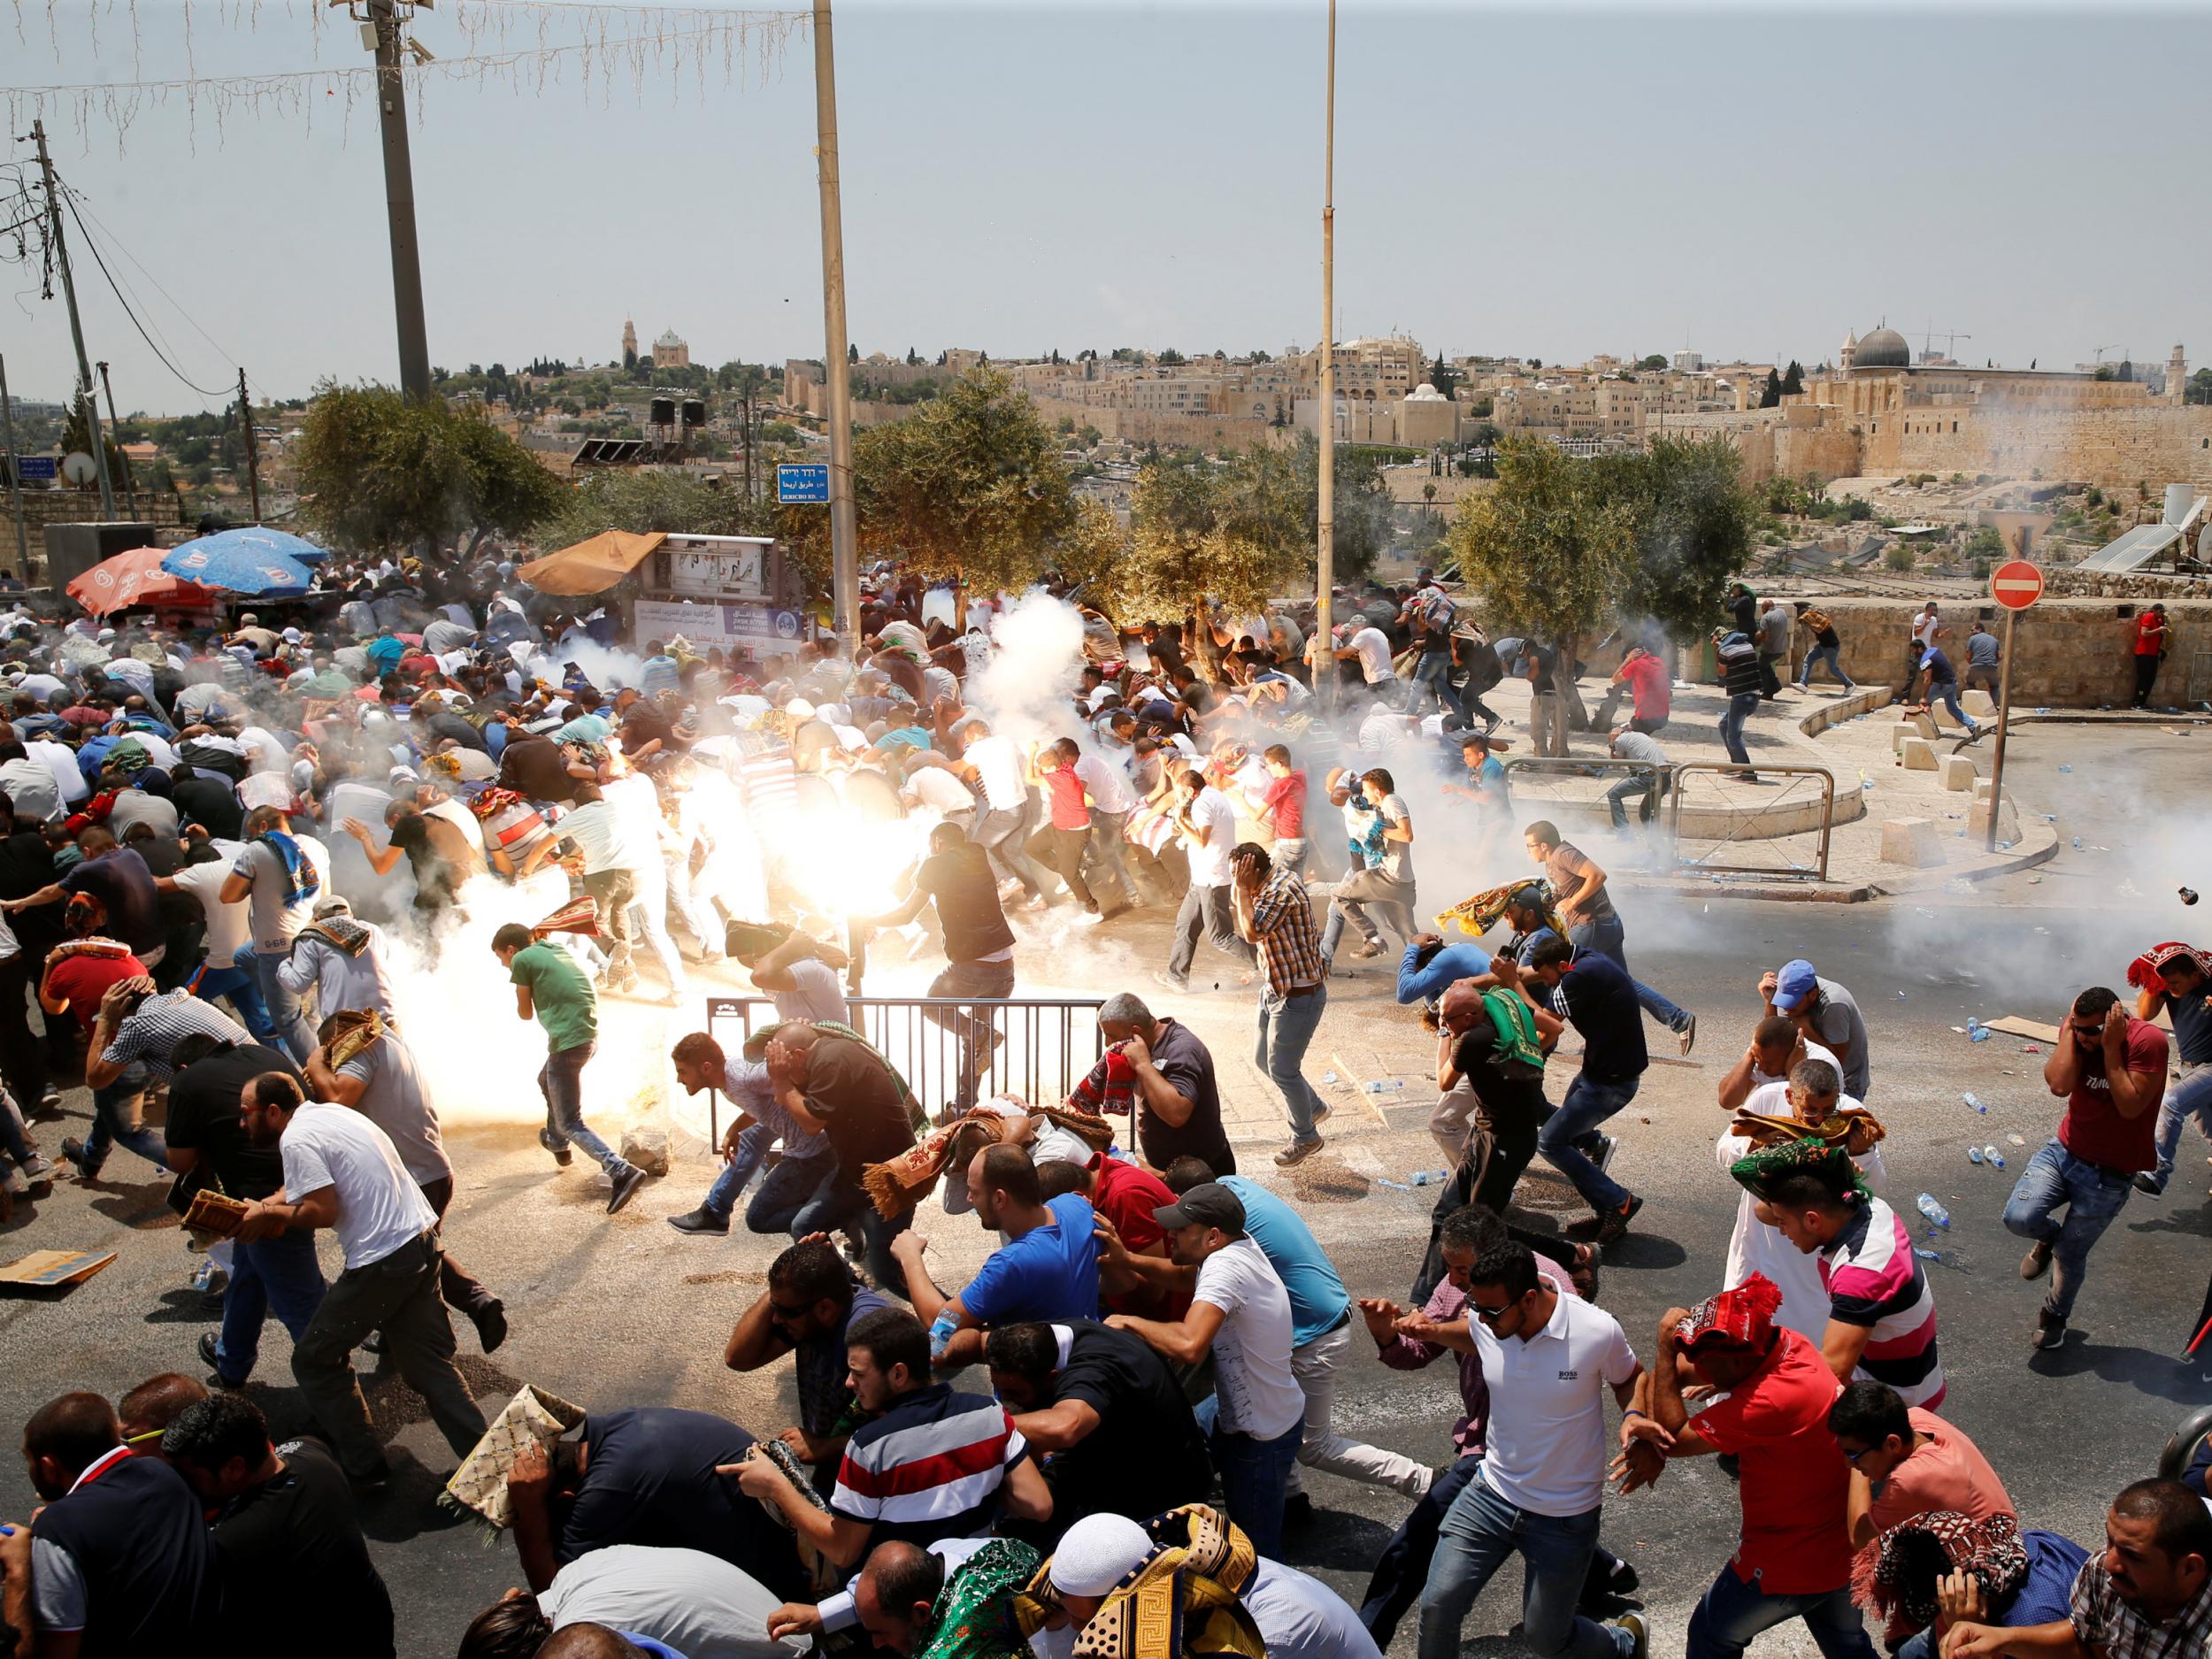 Palestinians react following tear gas that was shot by Israeli forces after Friday prayer on a street outside Jerusalem's Old City